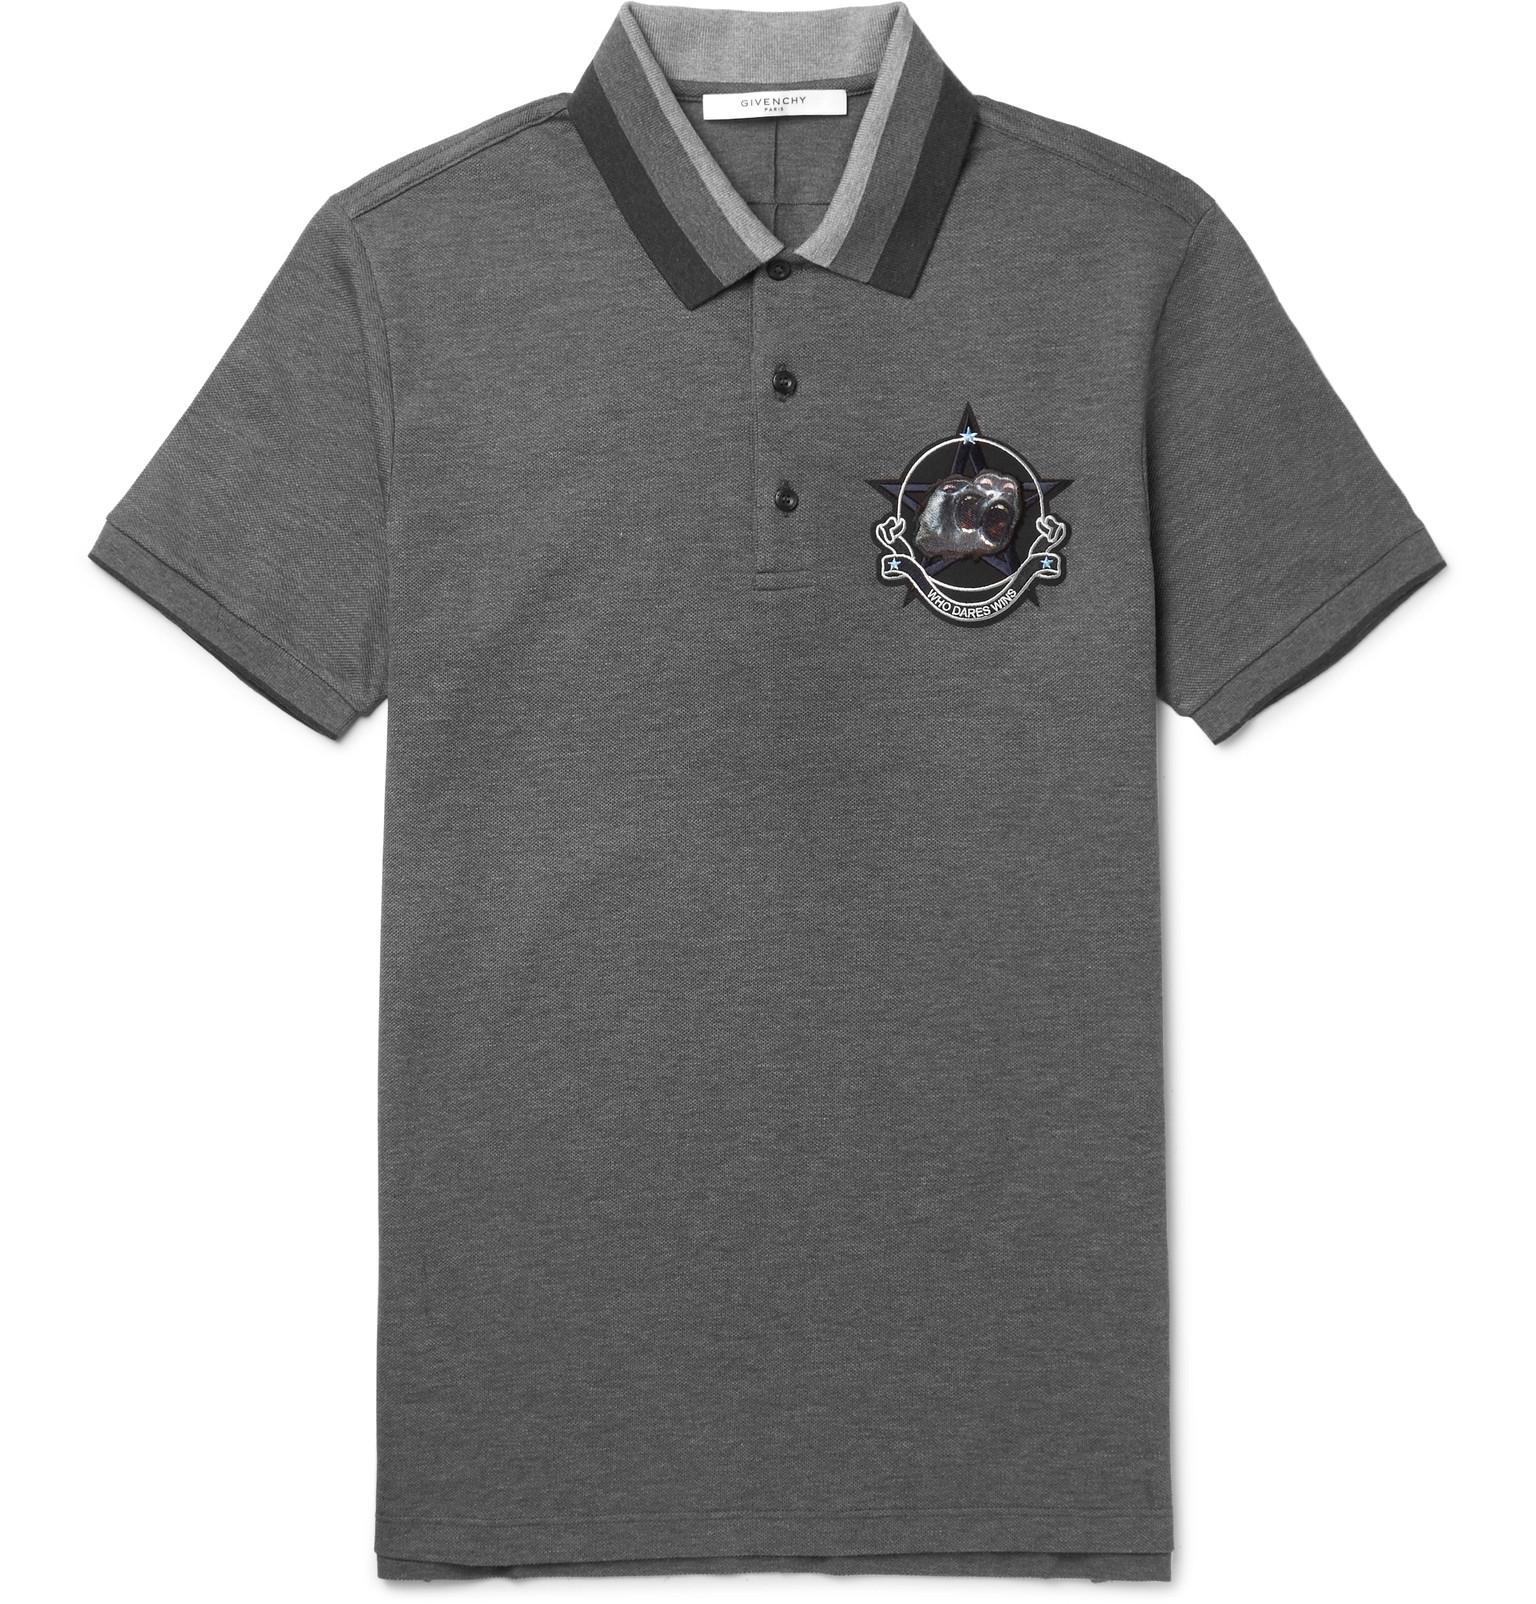 Givenchy Monkey Brothers Appliquéd Cotton-piqué Polo Shirt in Charcoal  (Gray) for Men - Lyst